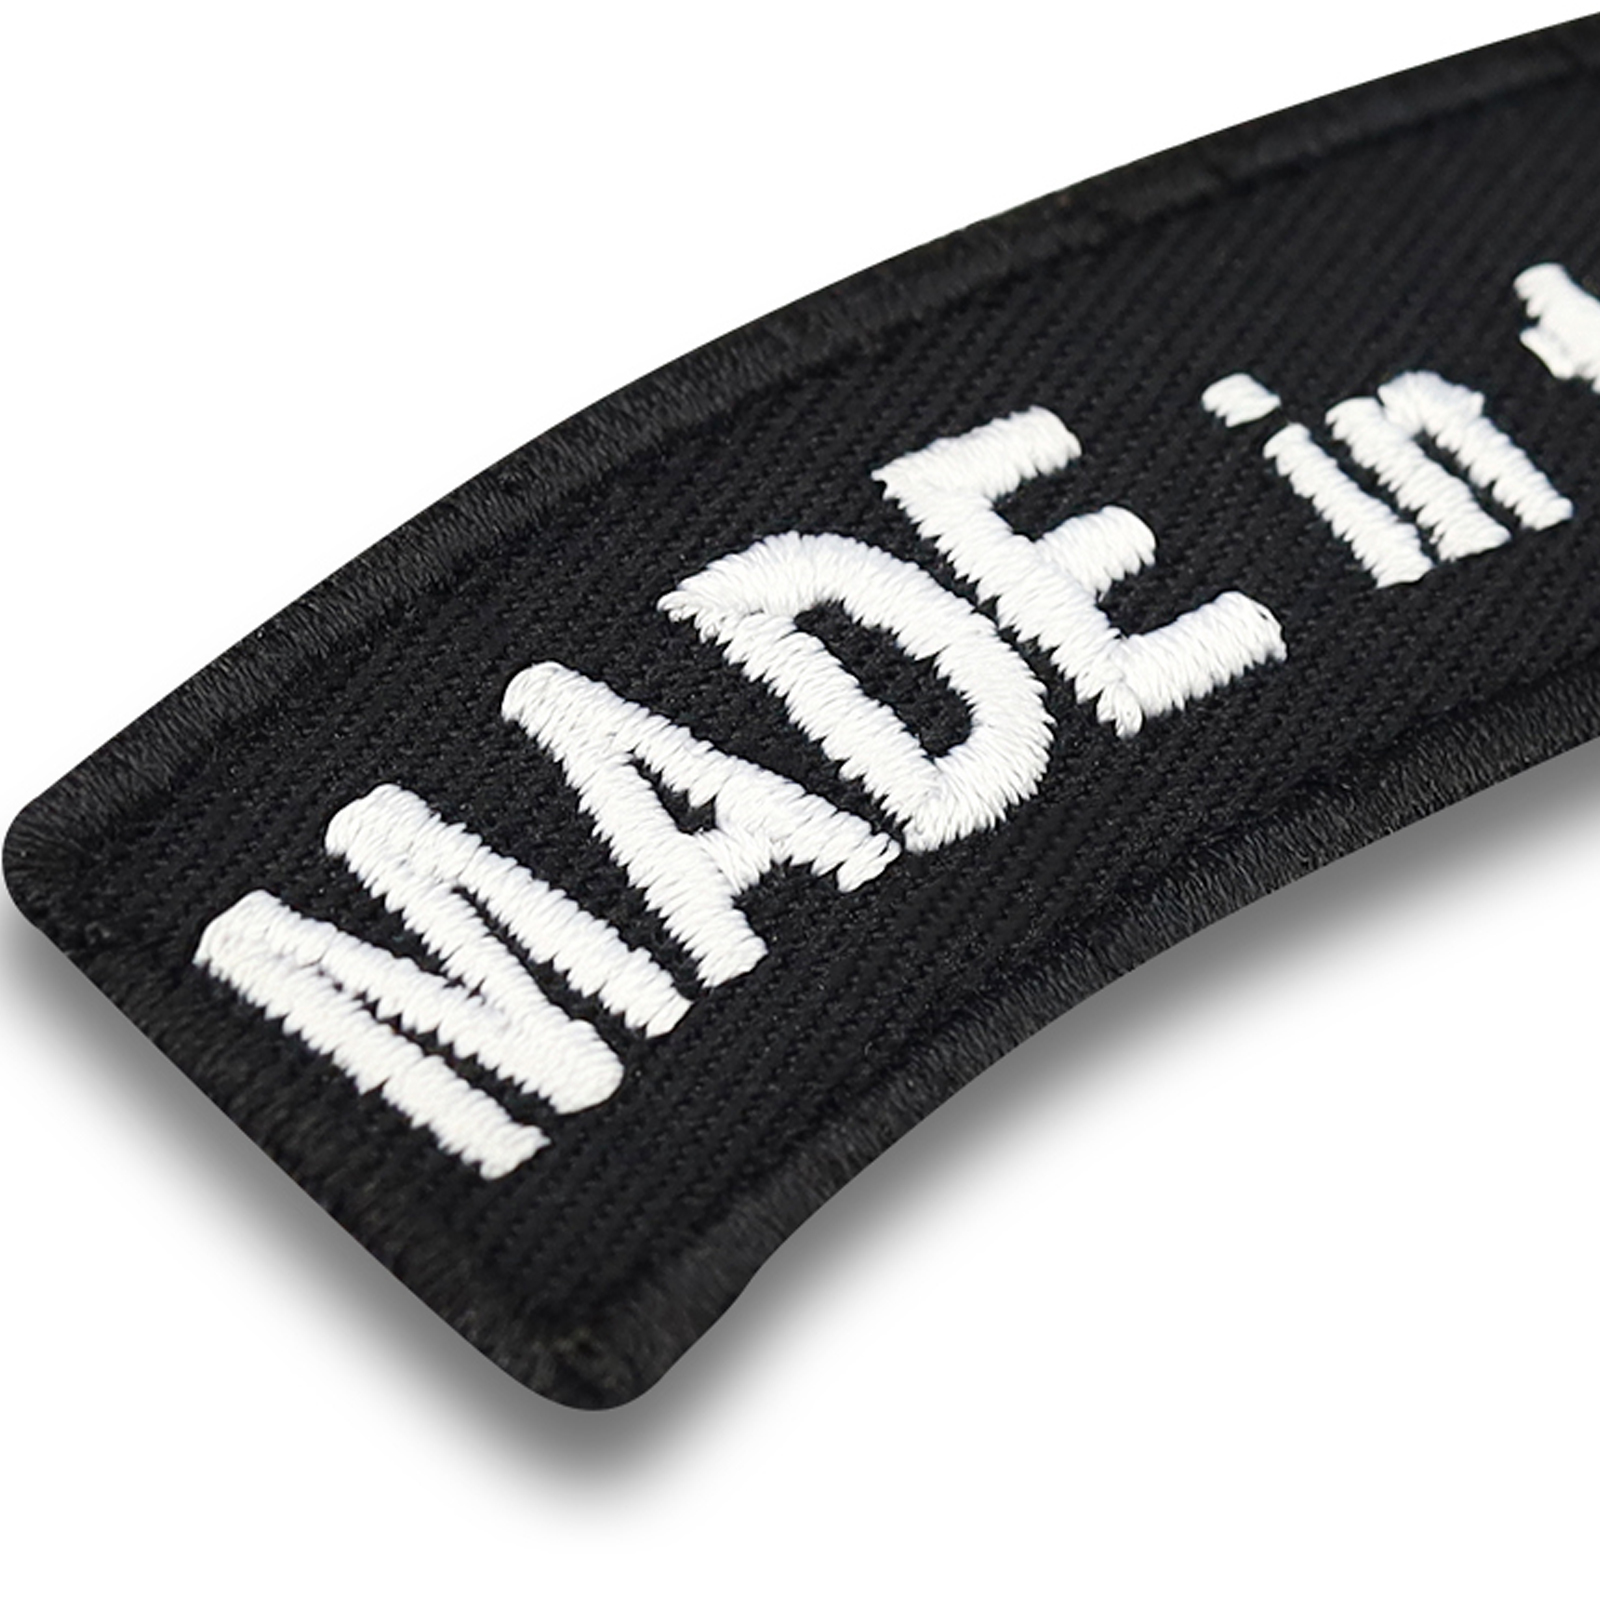 Made in the 80s - Patch